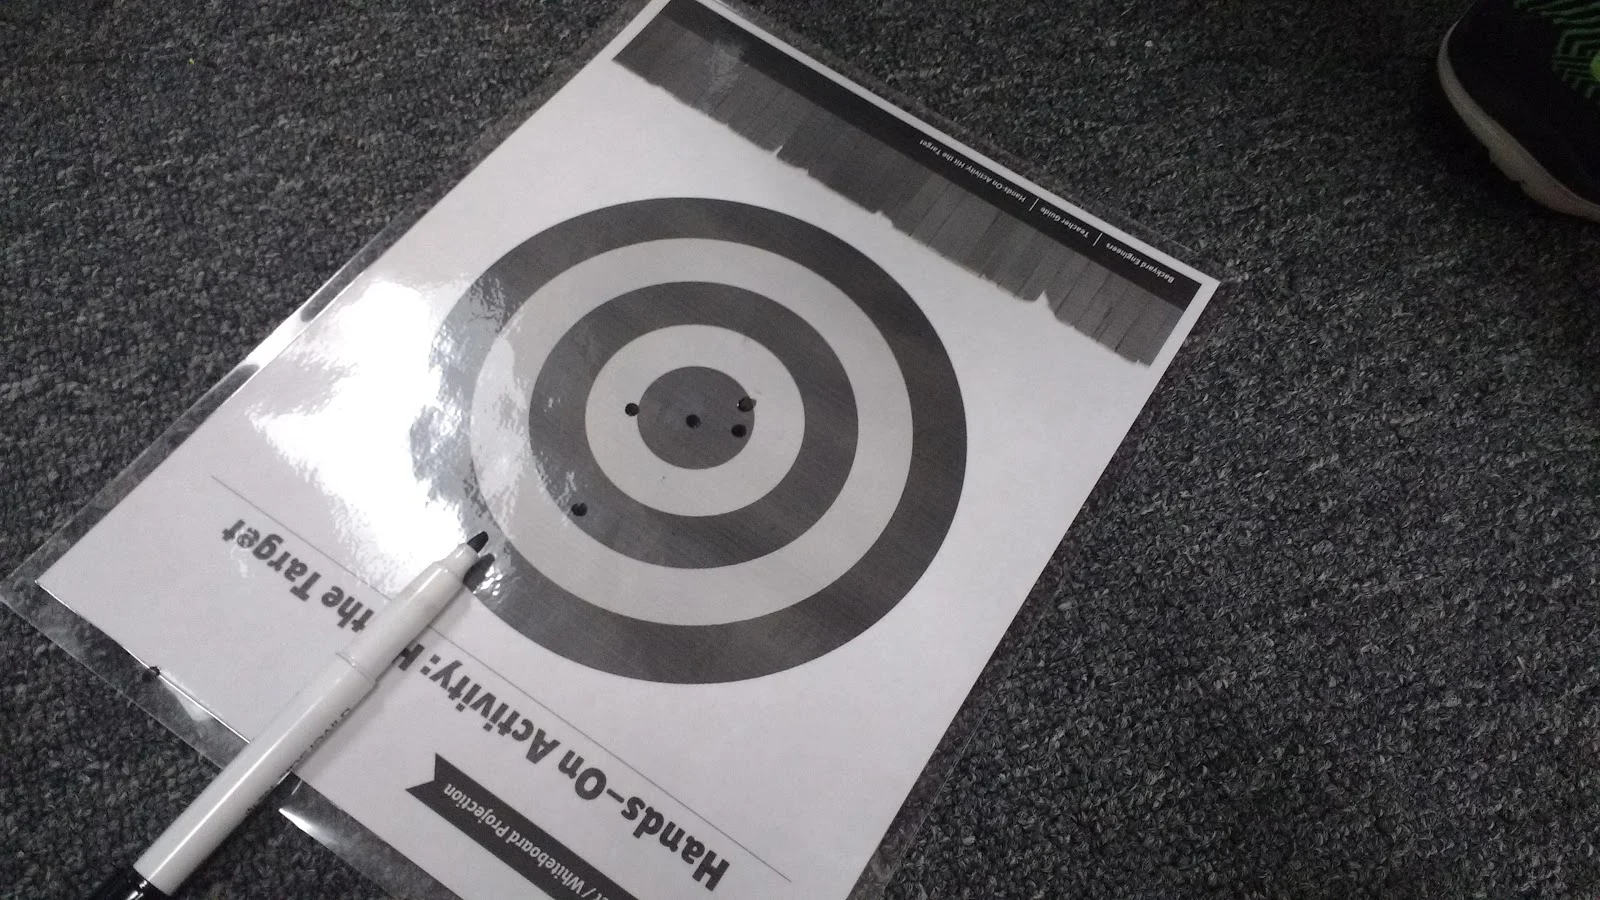 hit the target lab in physical science class 